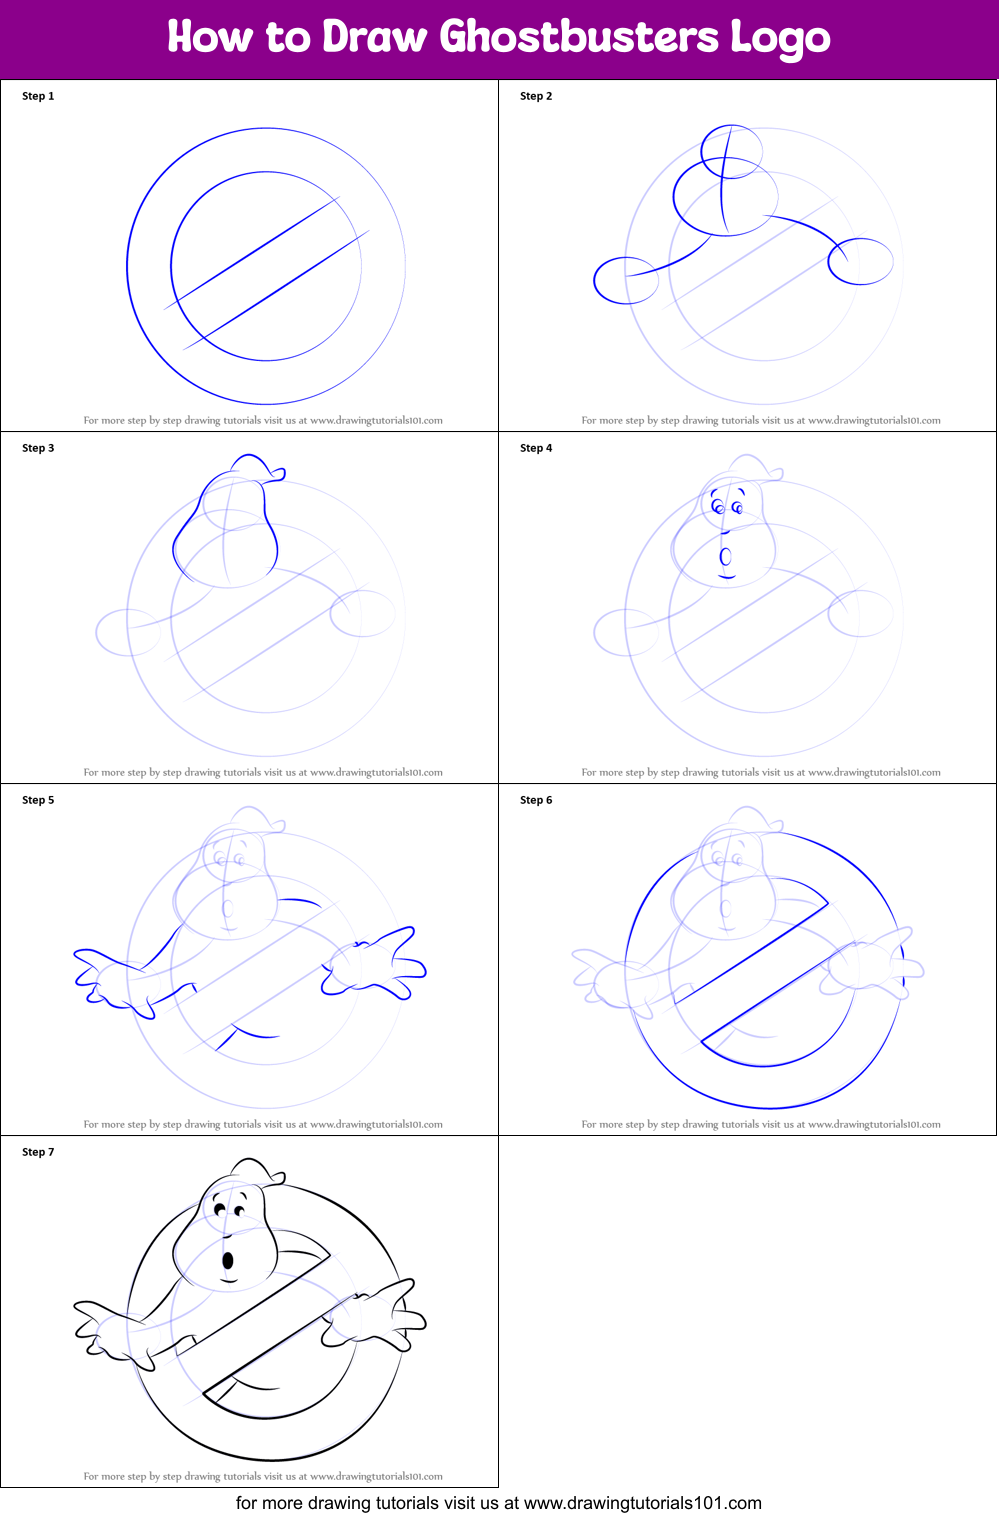 How to Draw Ghostbusters Logo (Ghostbusters) Step by Step